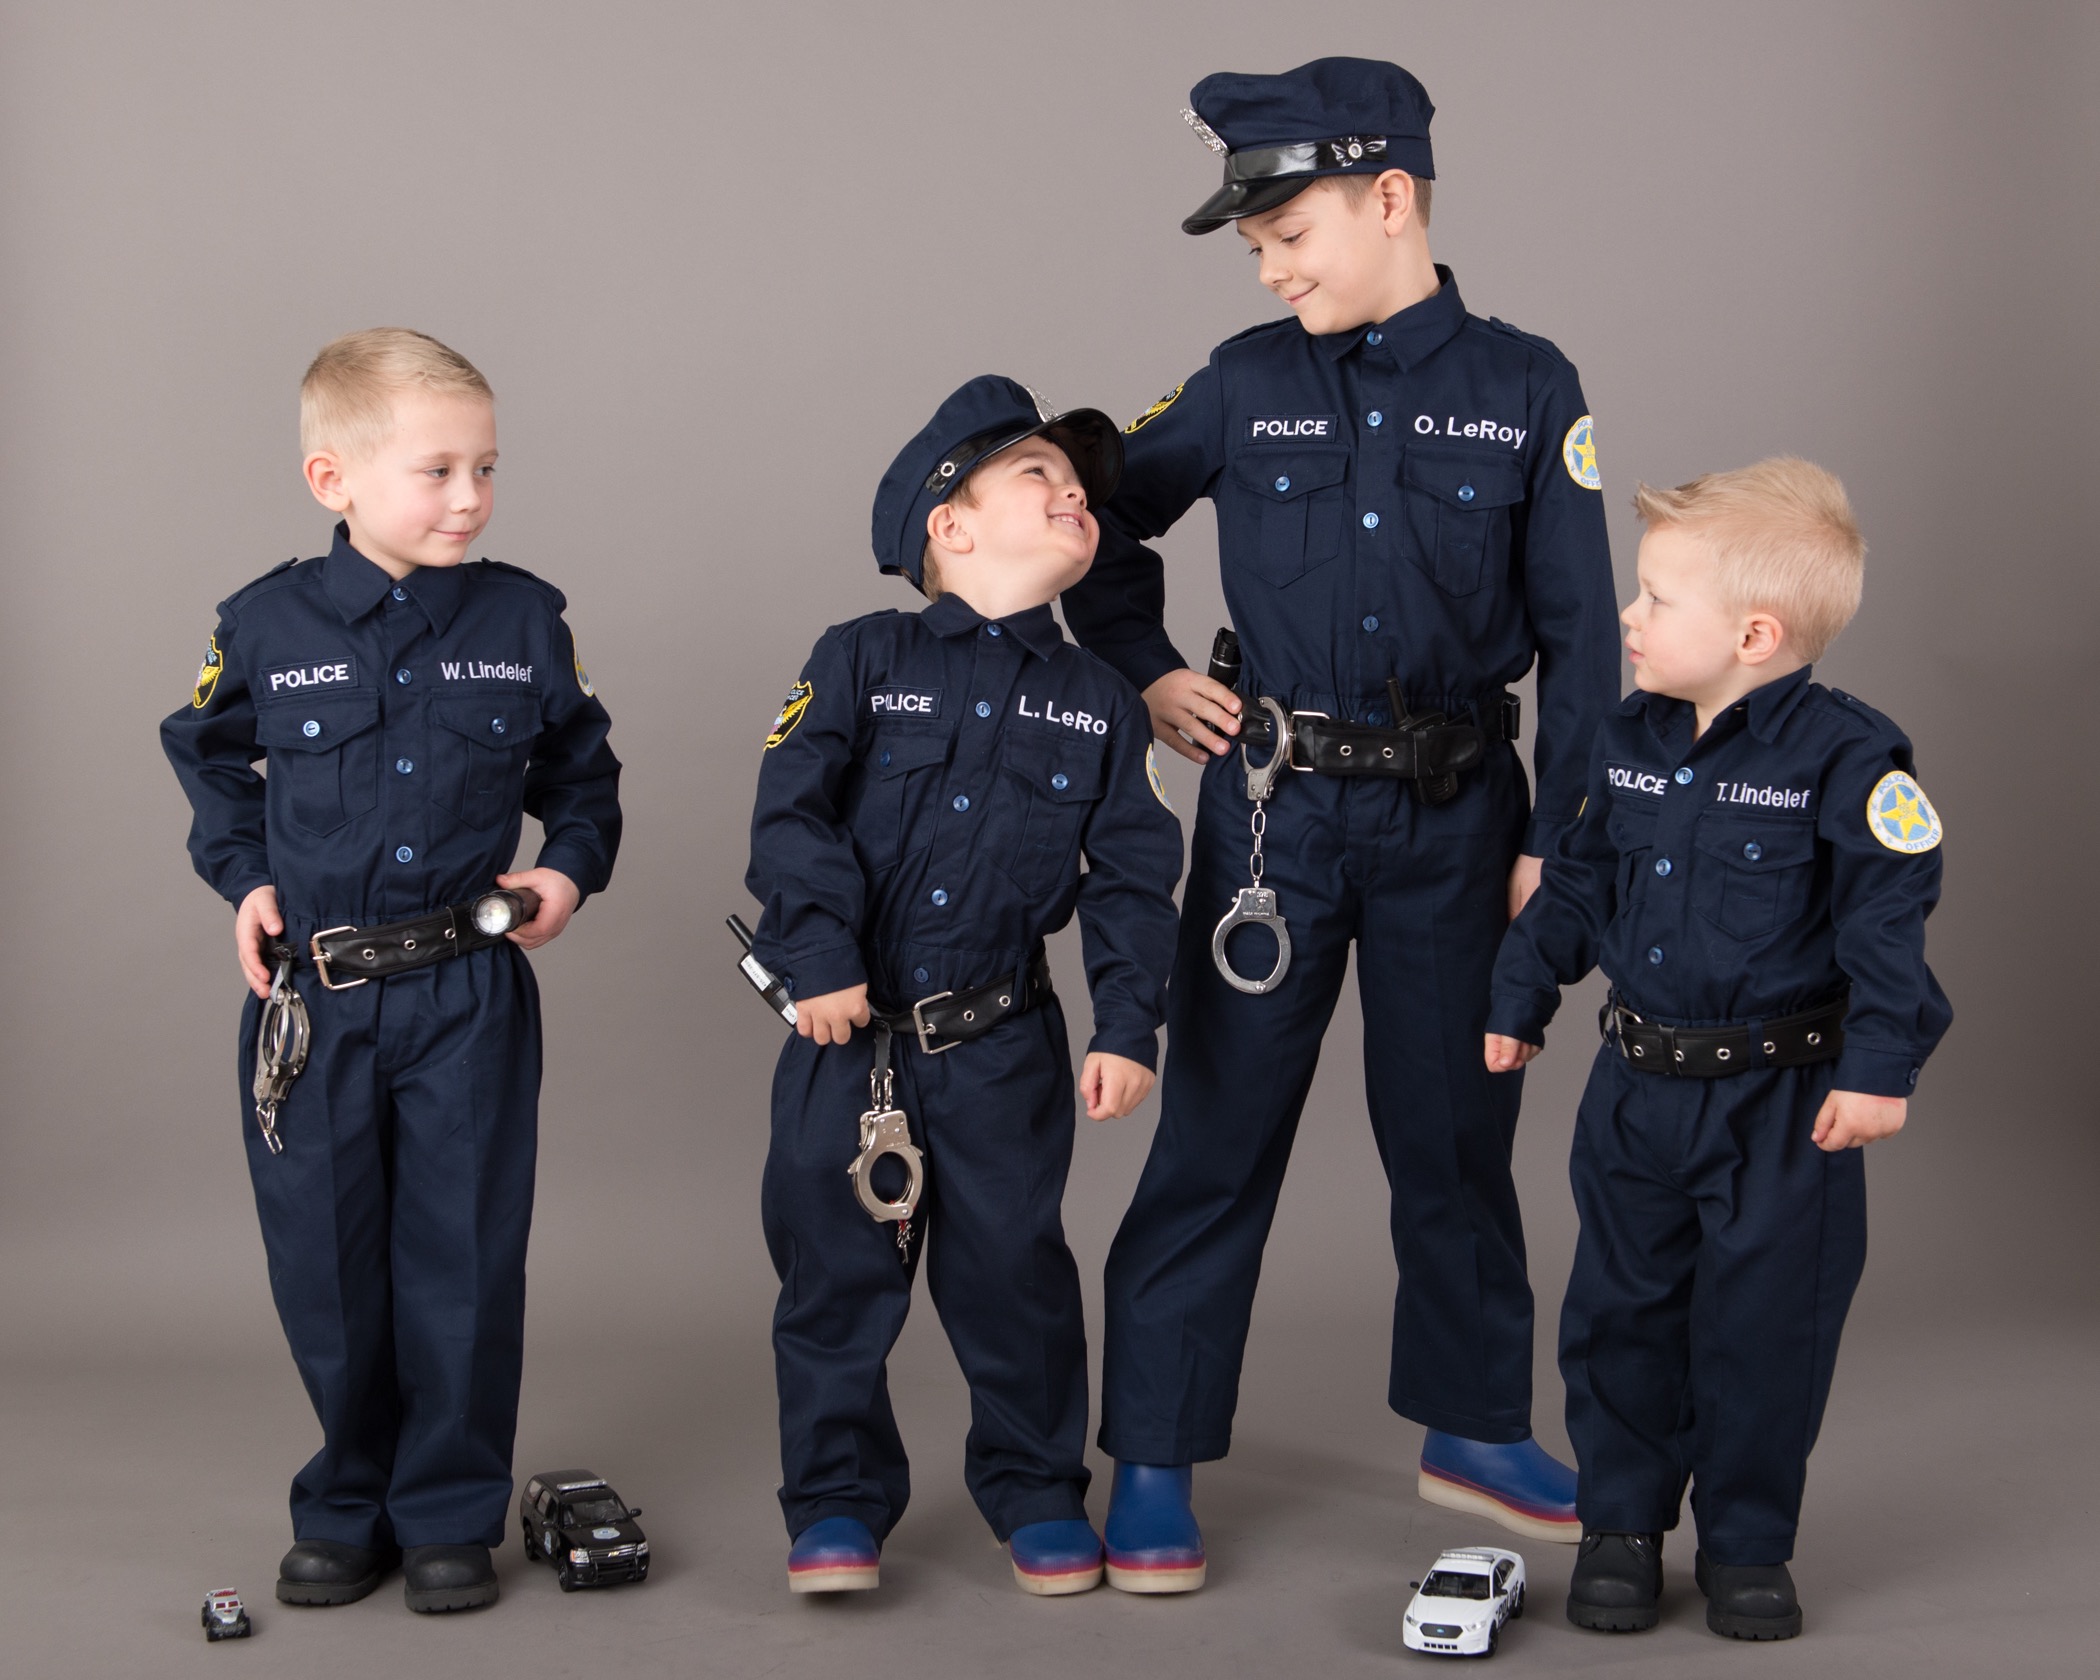 Kid's Police Costume Embroidery PERSONALIZED, Authentic, High-quality FREE  Hat Perfect Kid's Birthday Gift See Description for Sizing. 